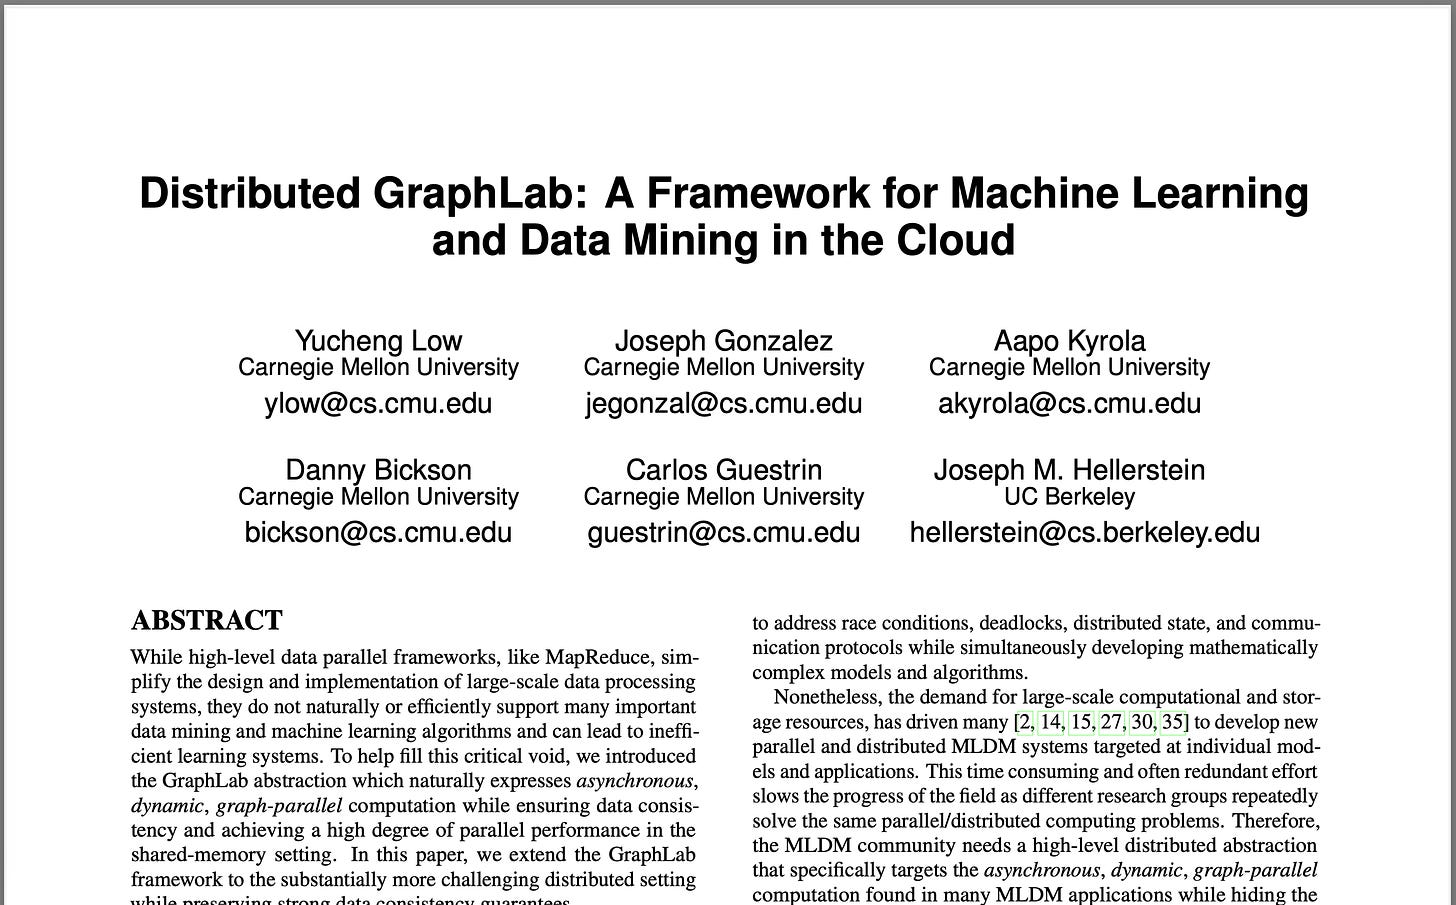 Beautifully formatted latex document.